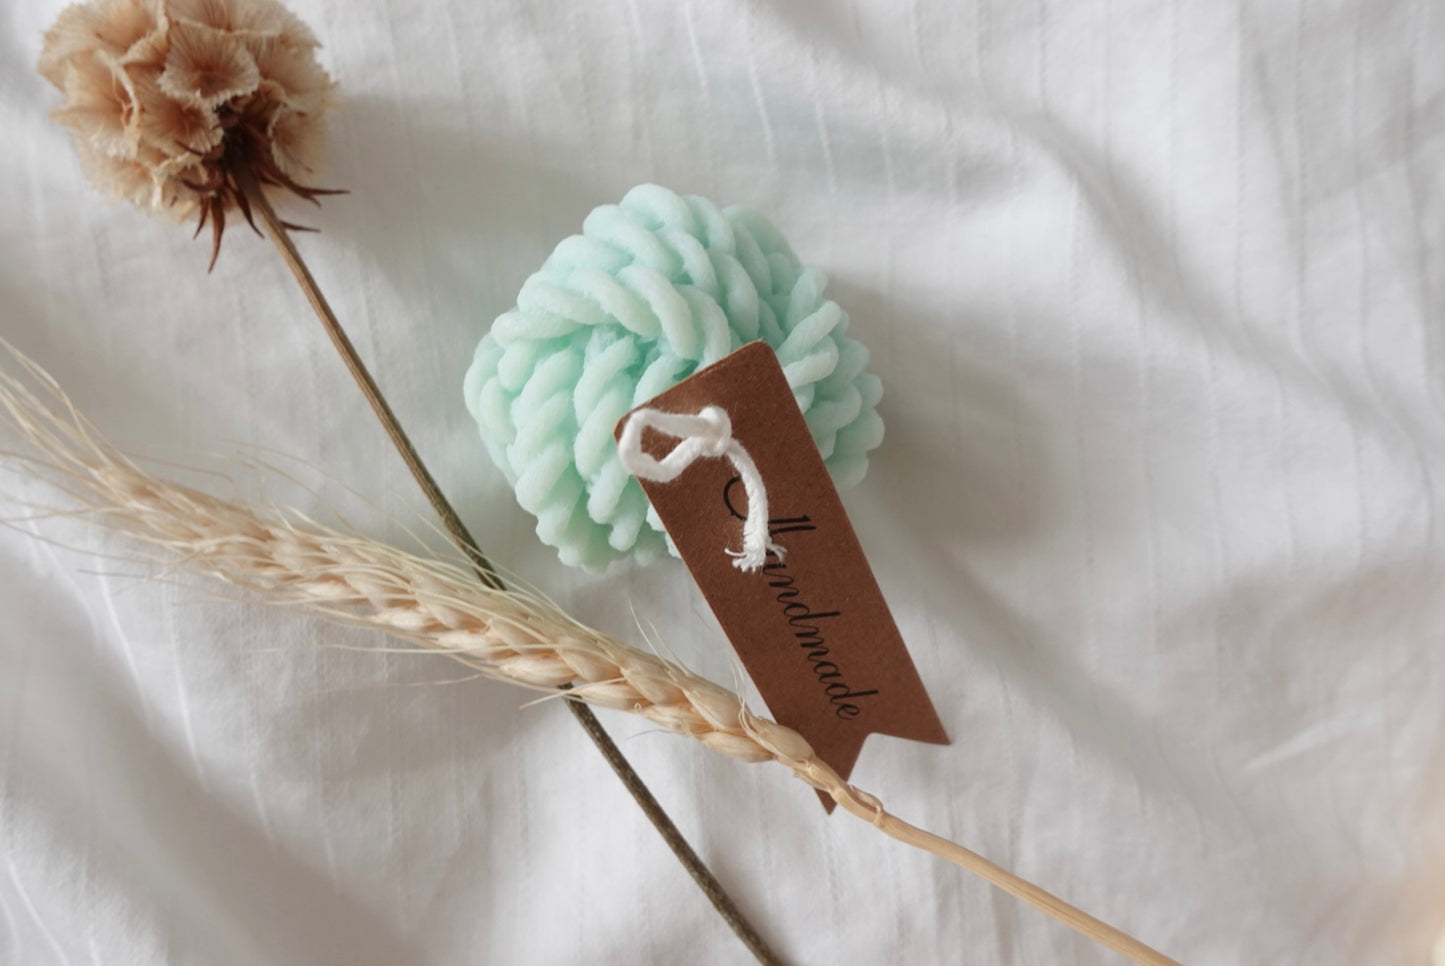 Knotted Yarn Ball Candle